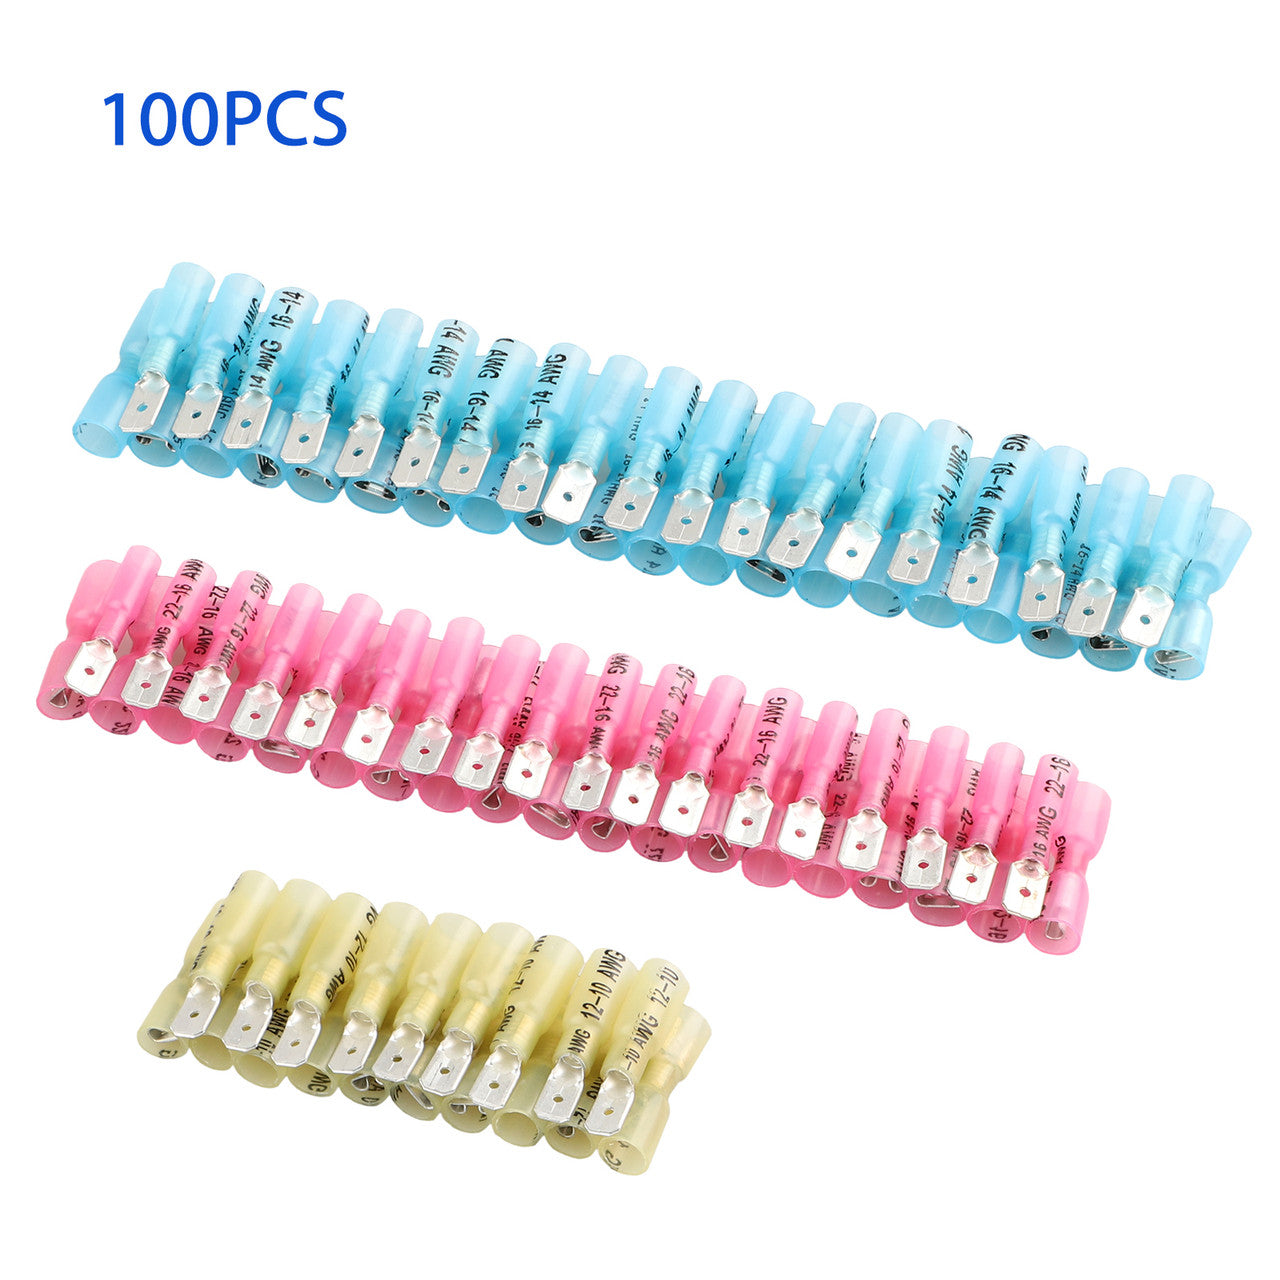 Solder Seal Wire Connectors, Heat Shrink Butt Connector Waterproof Insulated Electrical Butt Terminals Wire Splice for Automotive Marine Automotive Outdoor, 100PCS